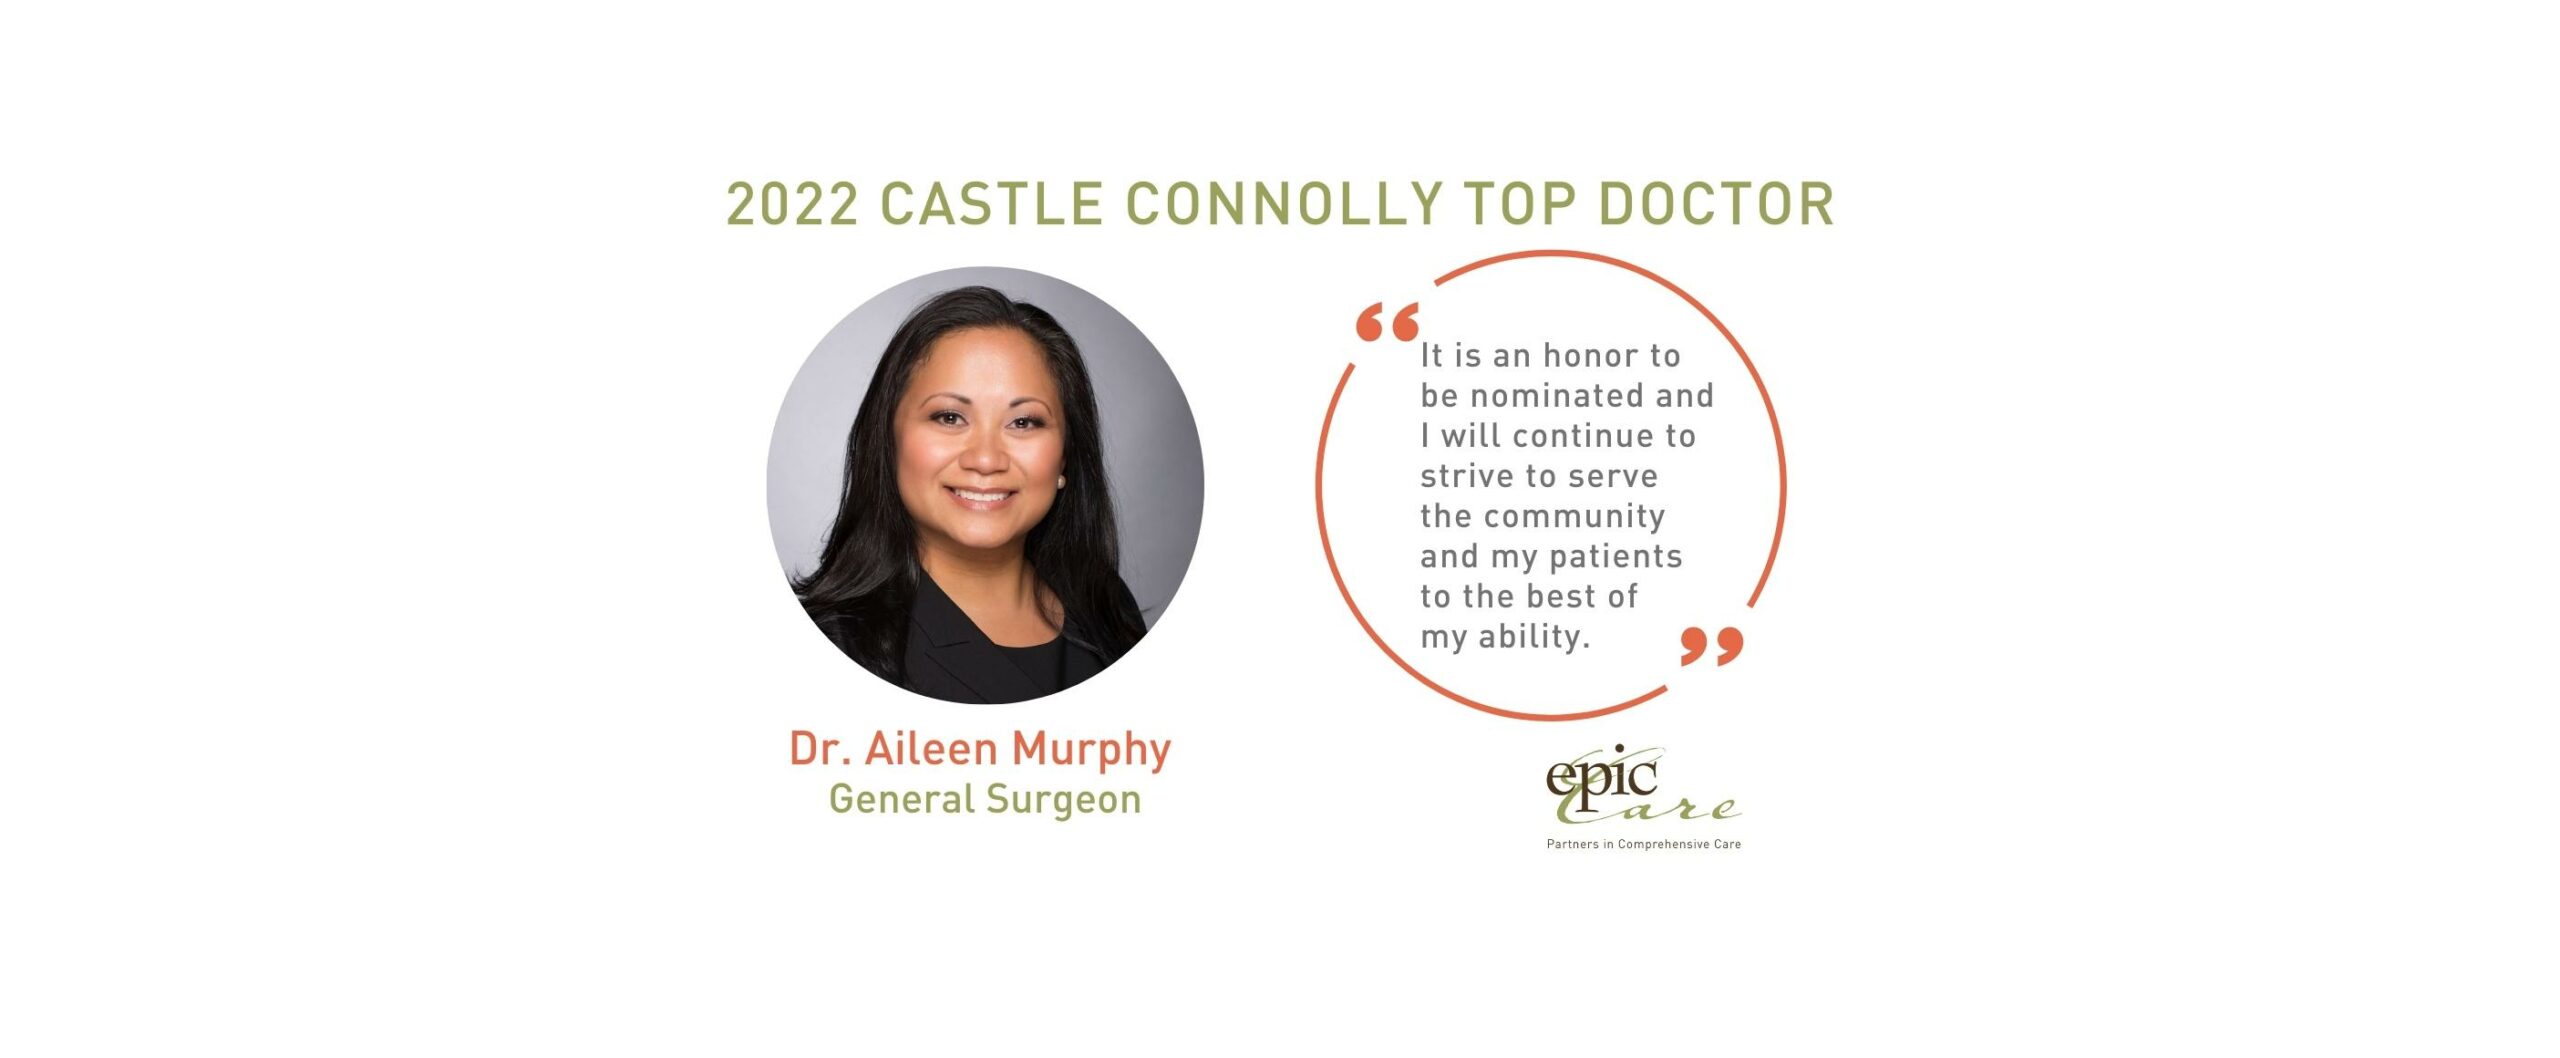 Epic Care surgeon Dr. Aileen Murphy named a 2022 Castle Connolly Top Doctor